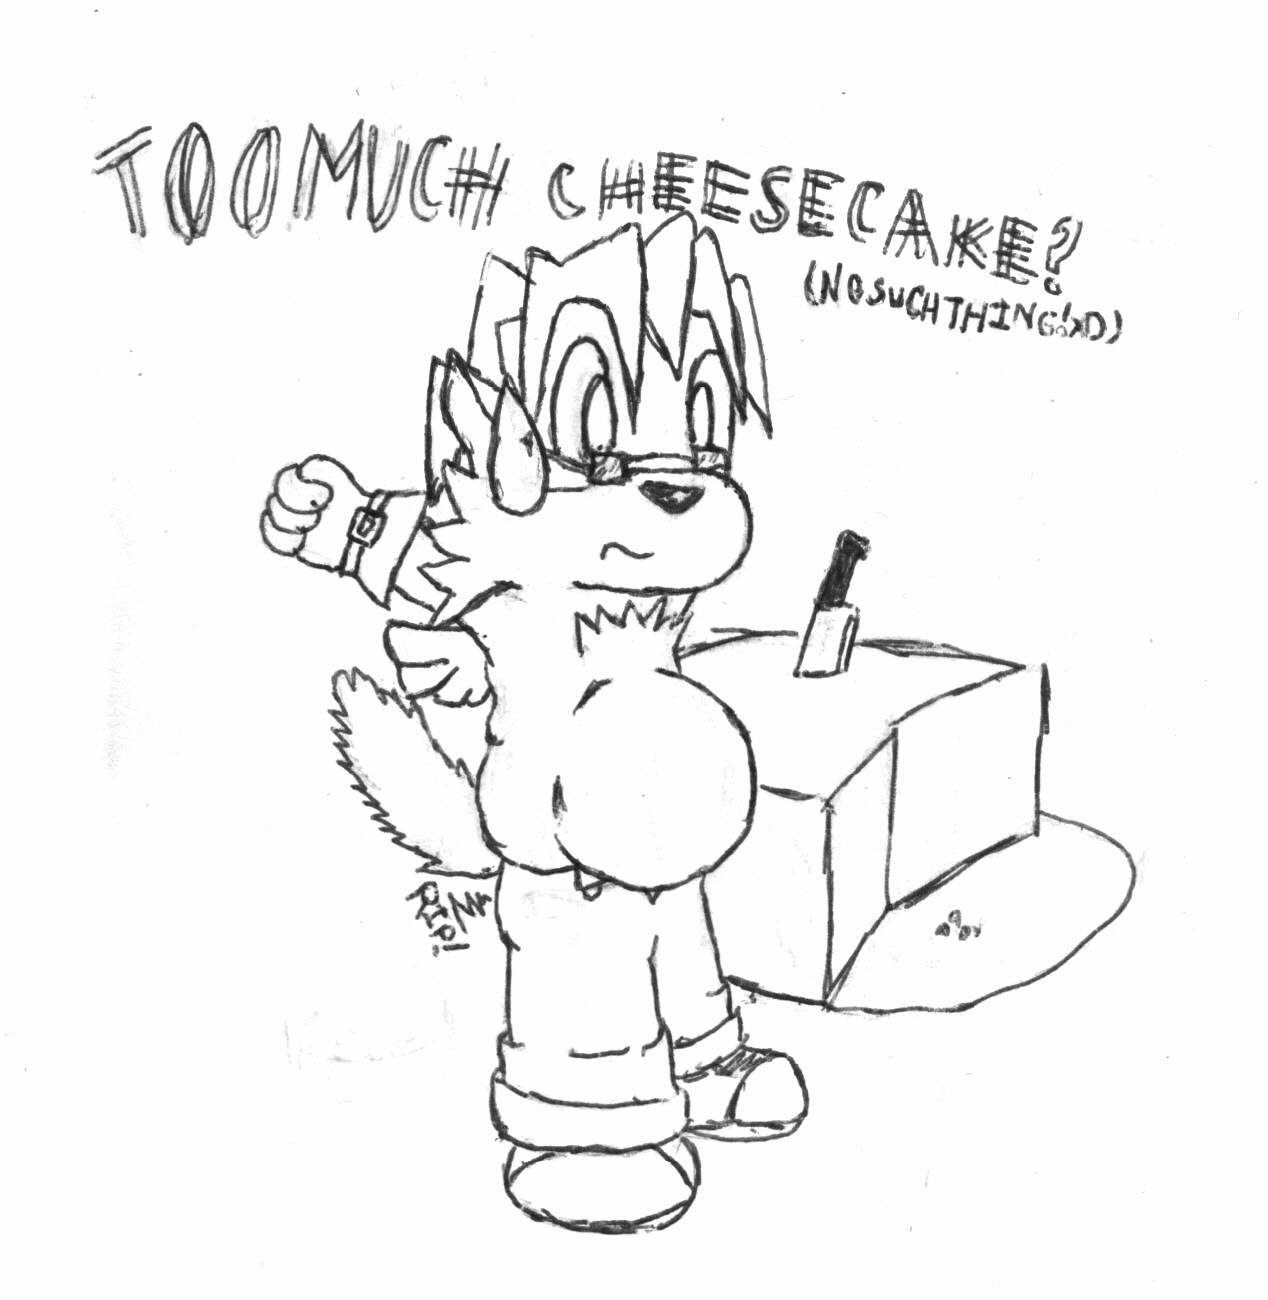 too much cheesecake? by Magimaster